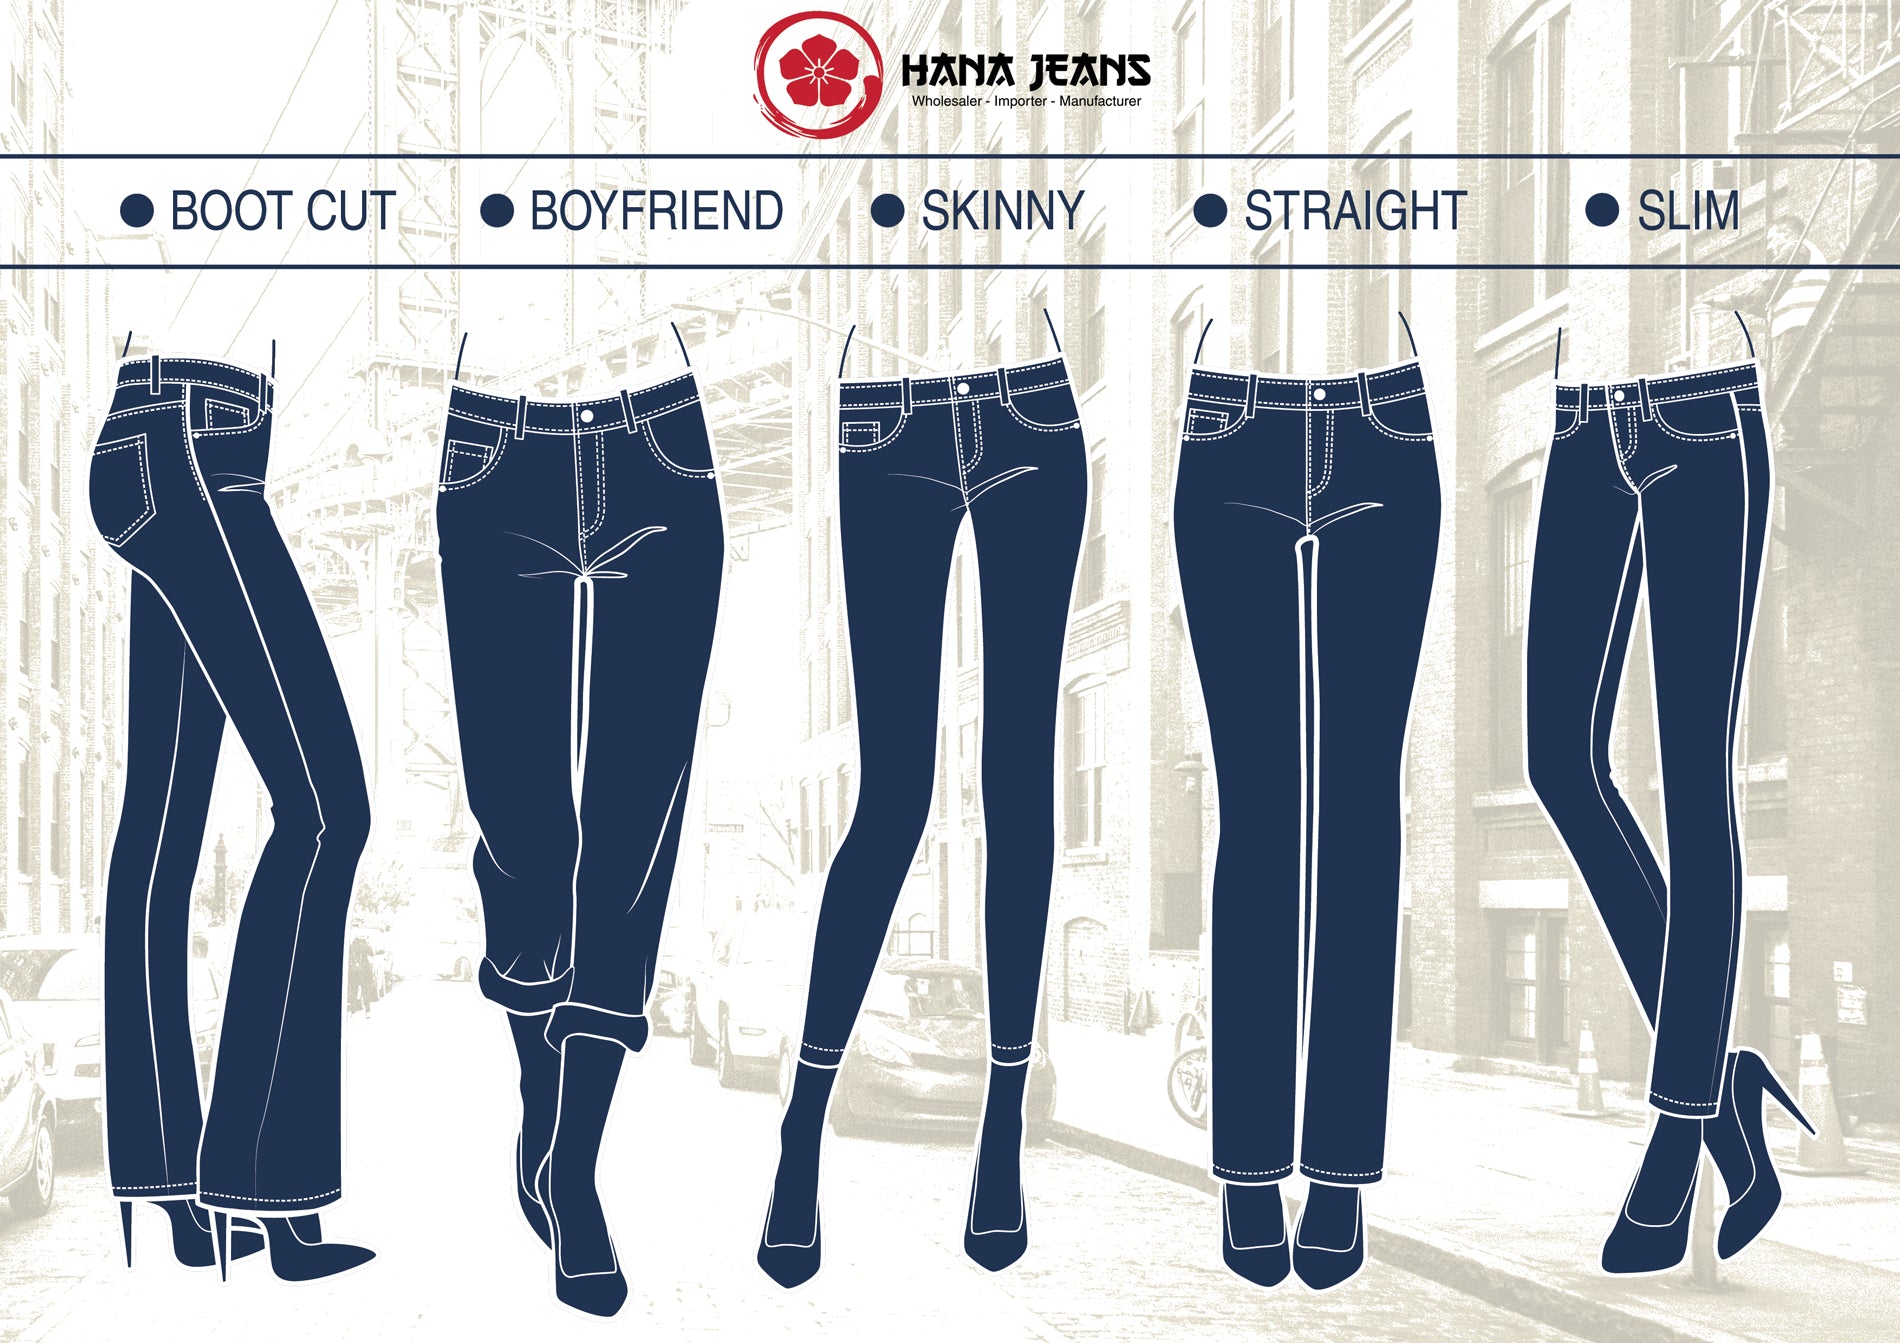 Difference in “cuts” and styles of Denim Jeans photo